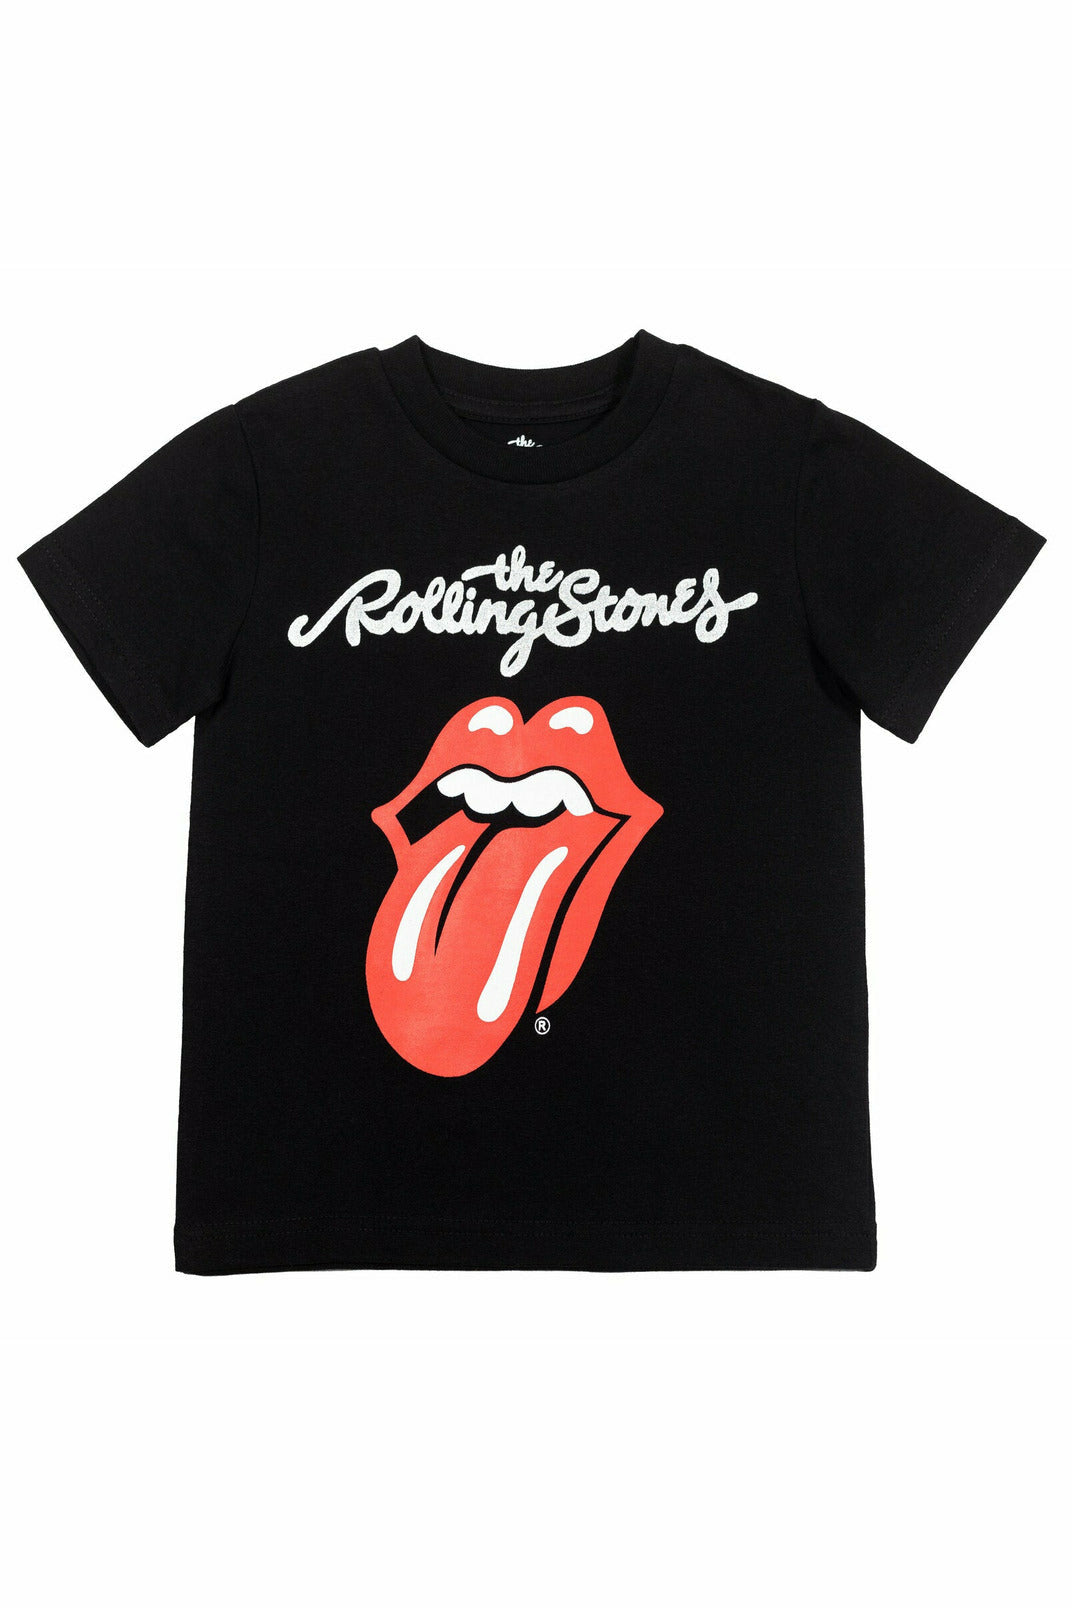 Rolling Stones Graphic T-Shirt